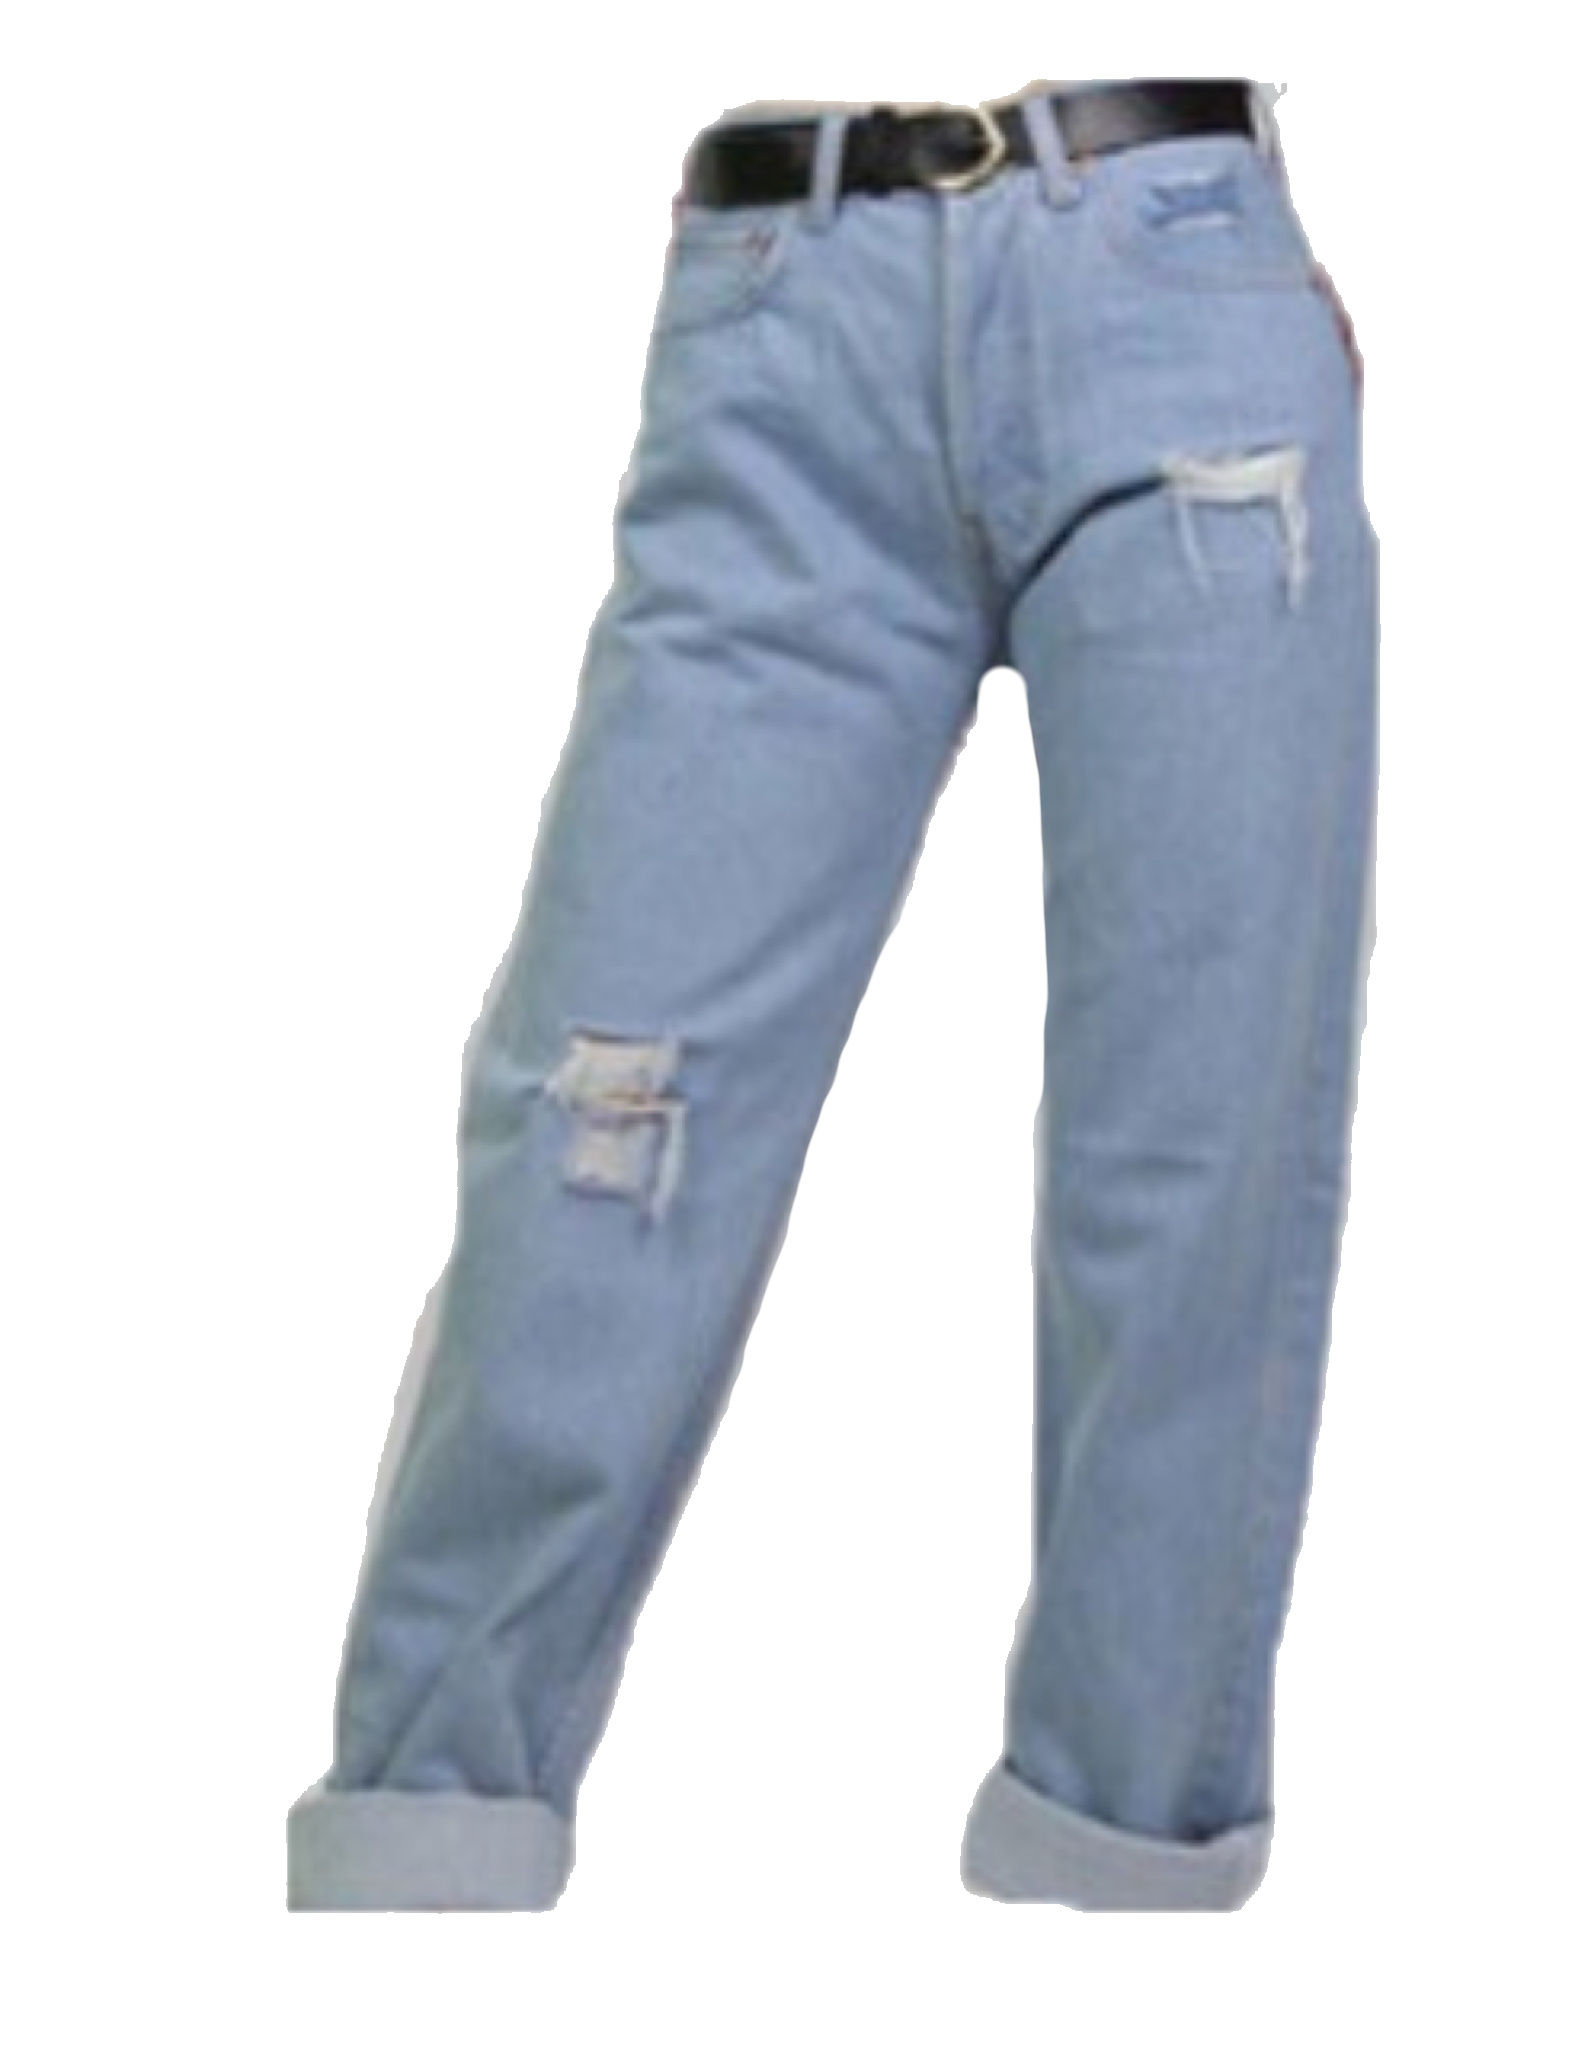 Aesthetic Shorts Png